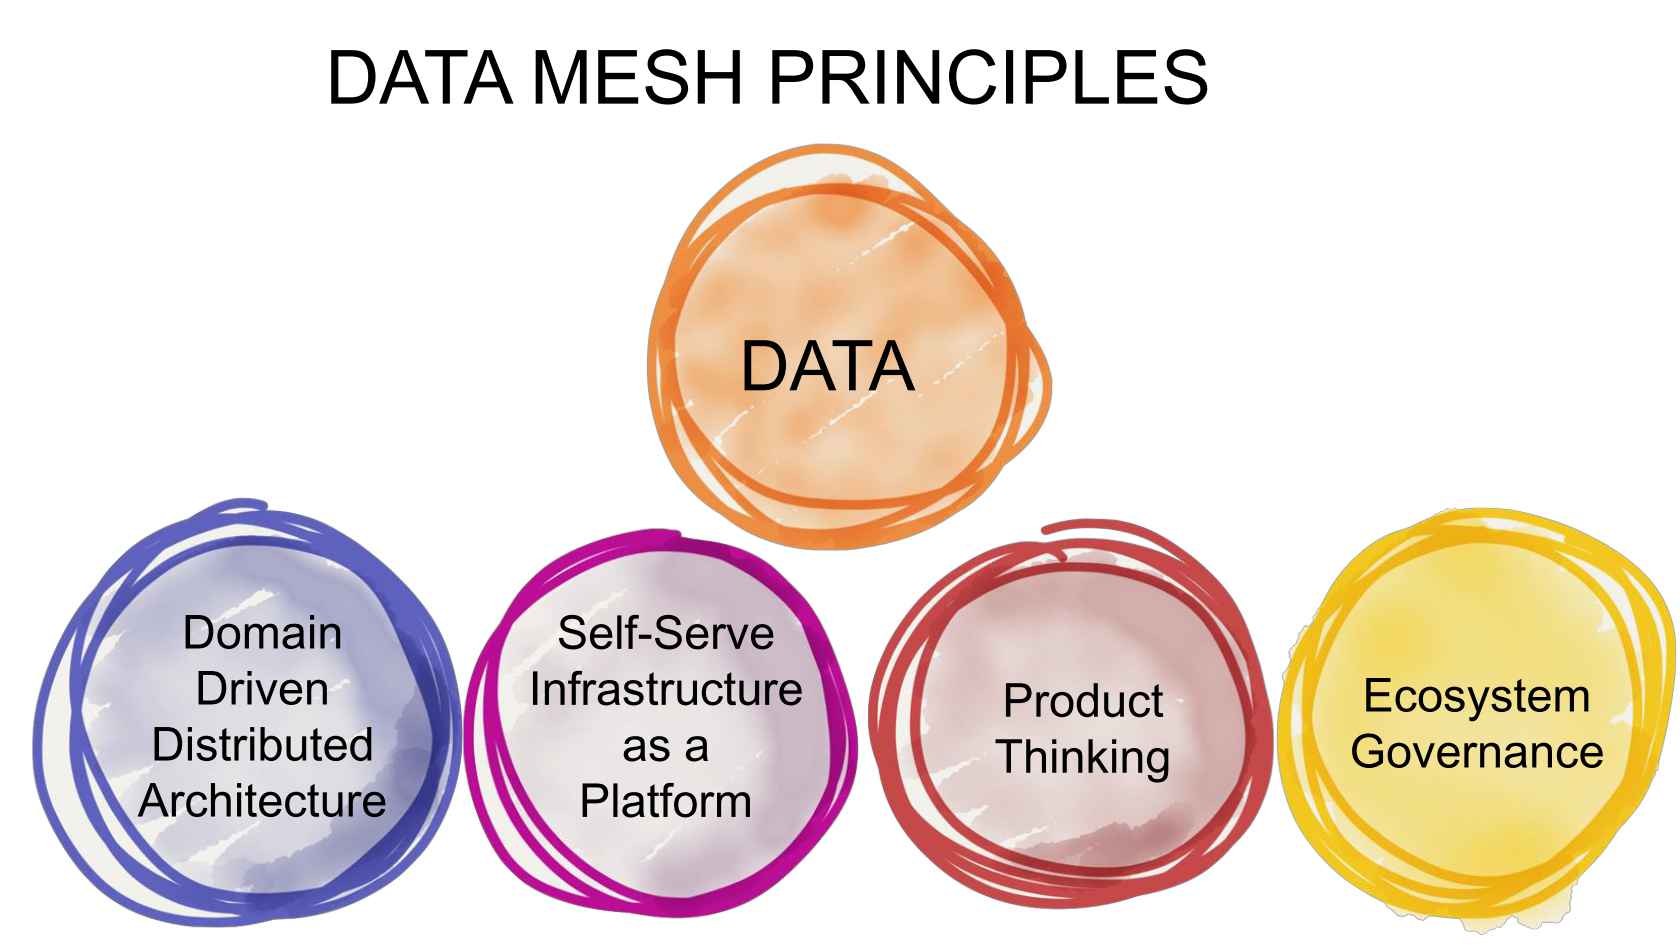 Why Was Data Mesh Architecture Introduced In The First Place?